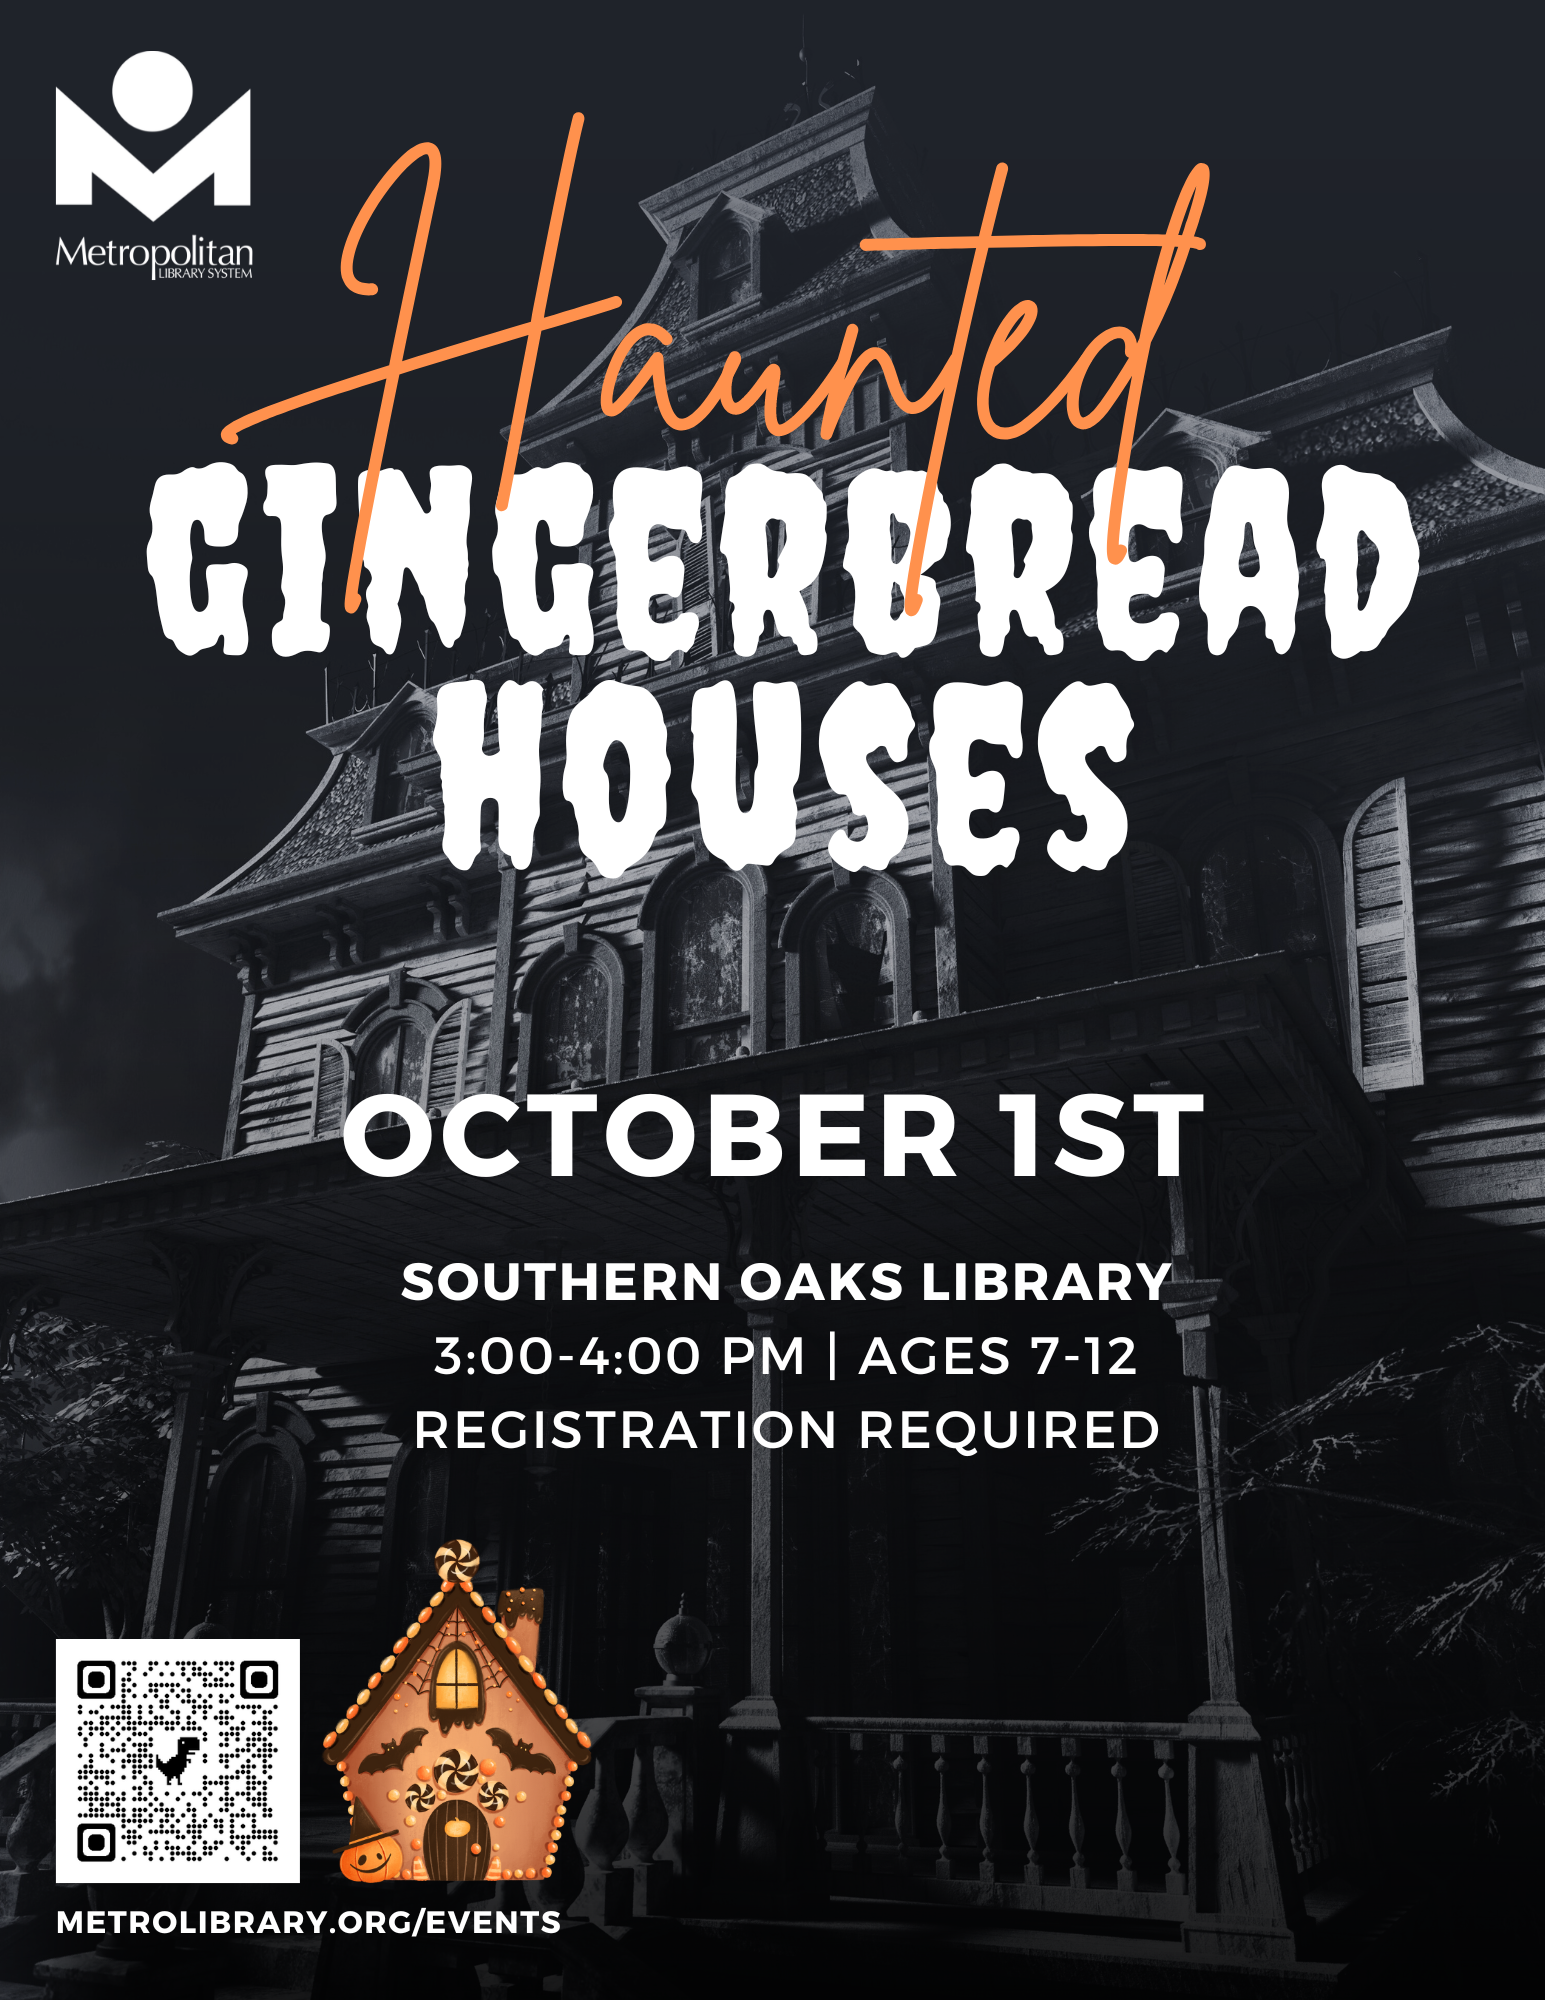 Spooky flyer advertising the Haunted Gingerbread Houses program